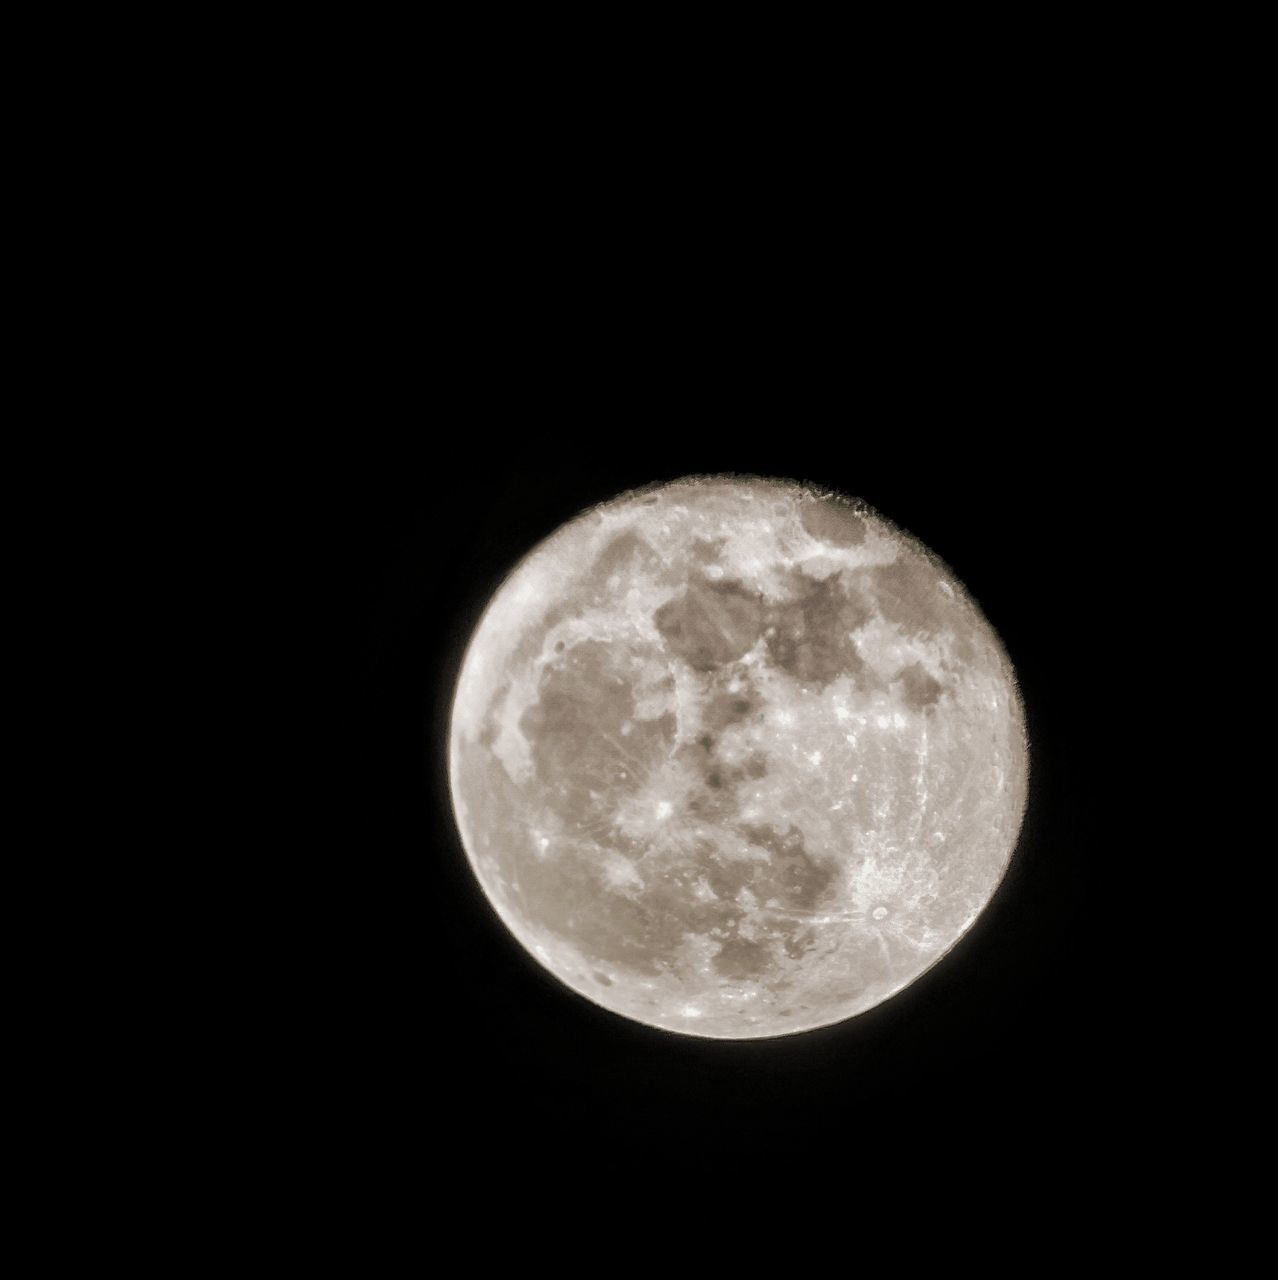 LOW ANGLE VIEW OF MOON AGAINST BLACK BACKGROUND